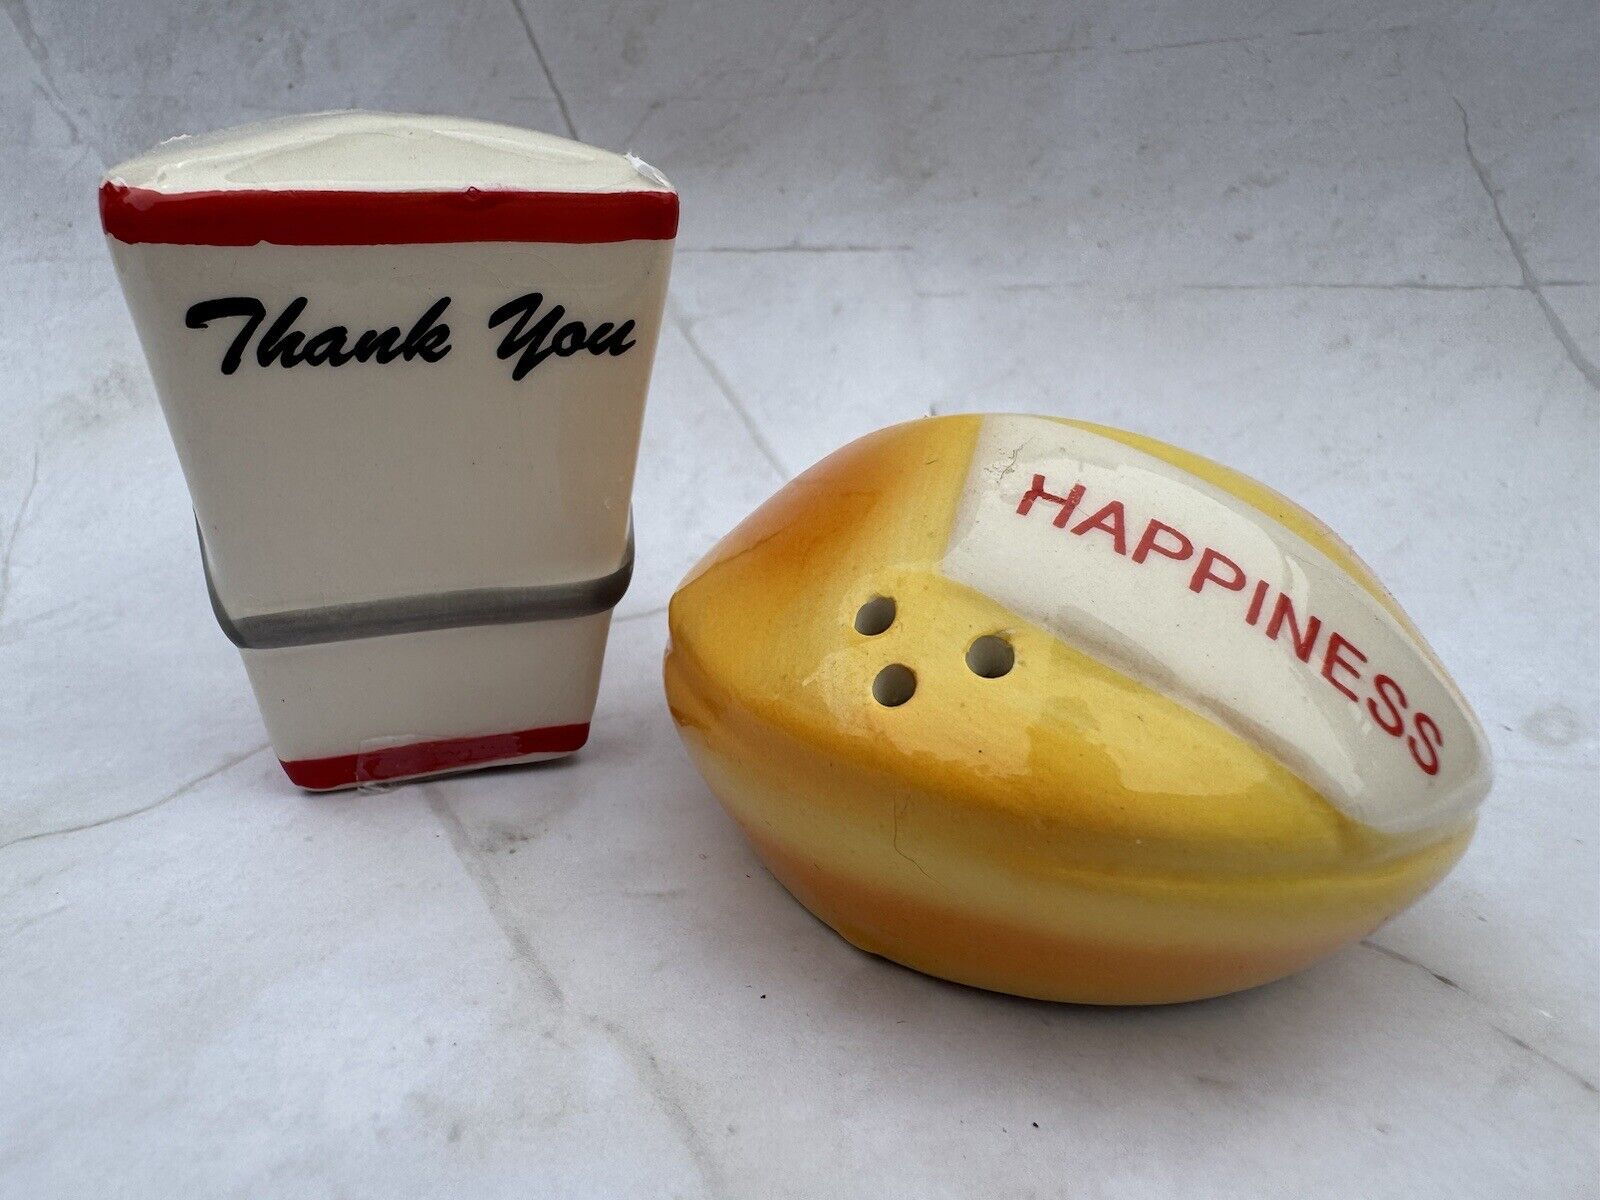 Pier One Salt and Pepper Shakers Take Out Box and Fortune Cookie Chinese Food